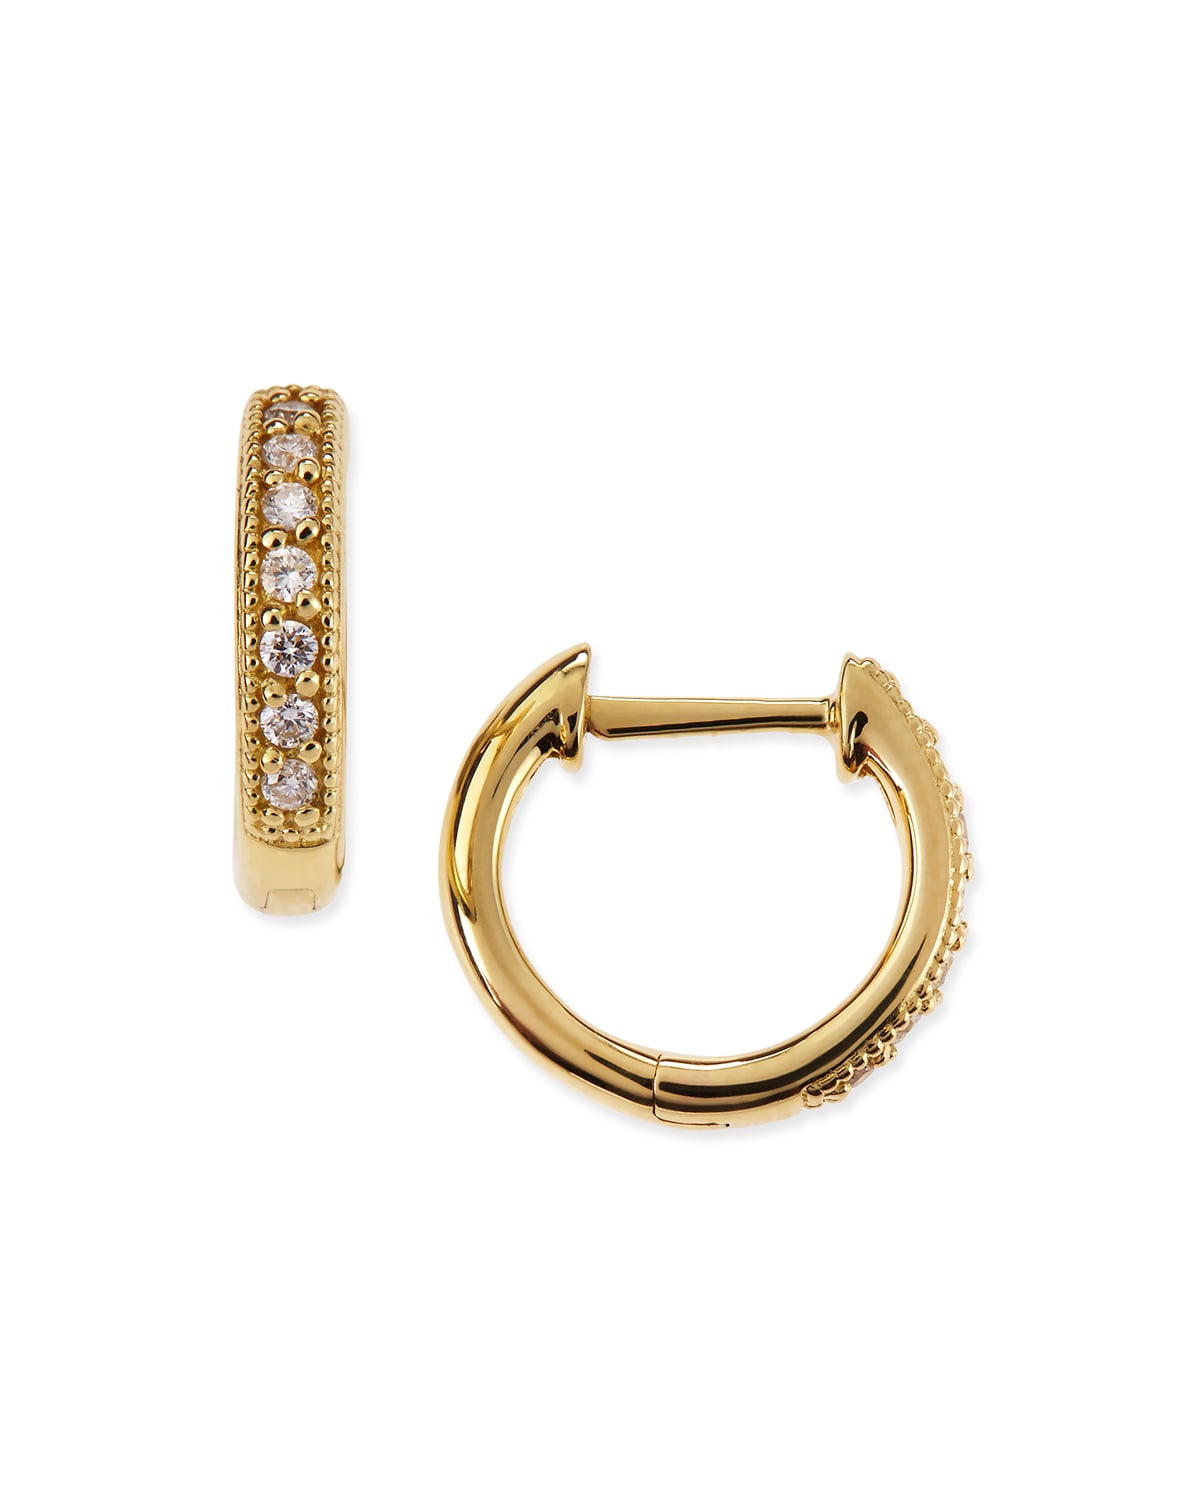 JUDE FRANCES SMALL 18K GOLD HOOP EARRINGS WITH DIAMONDS, 11MM